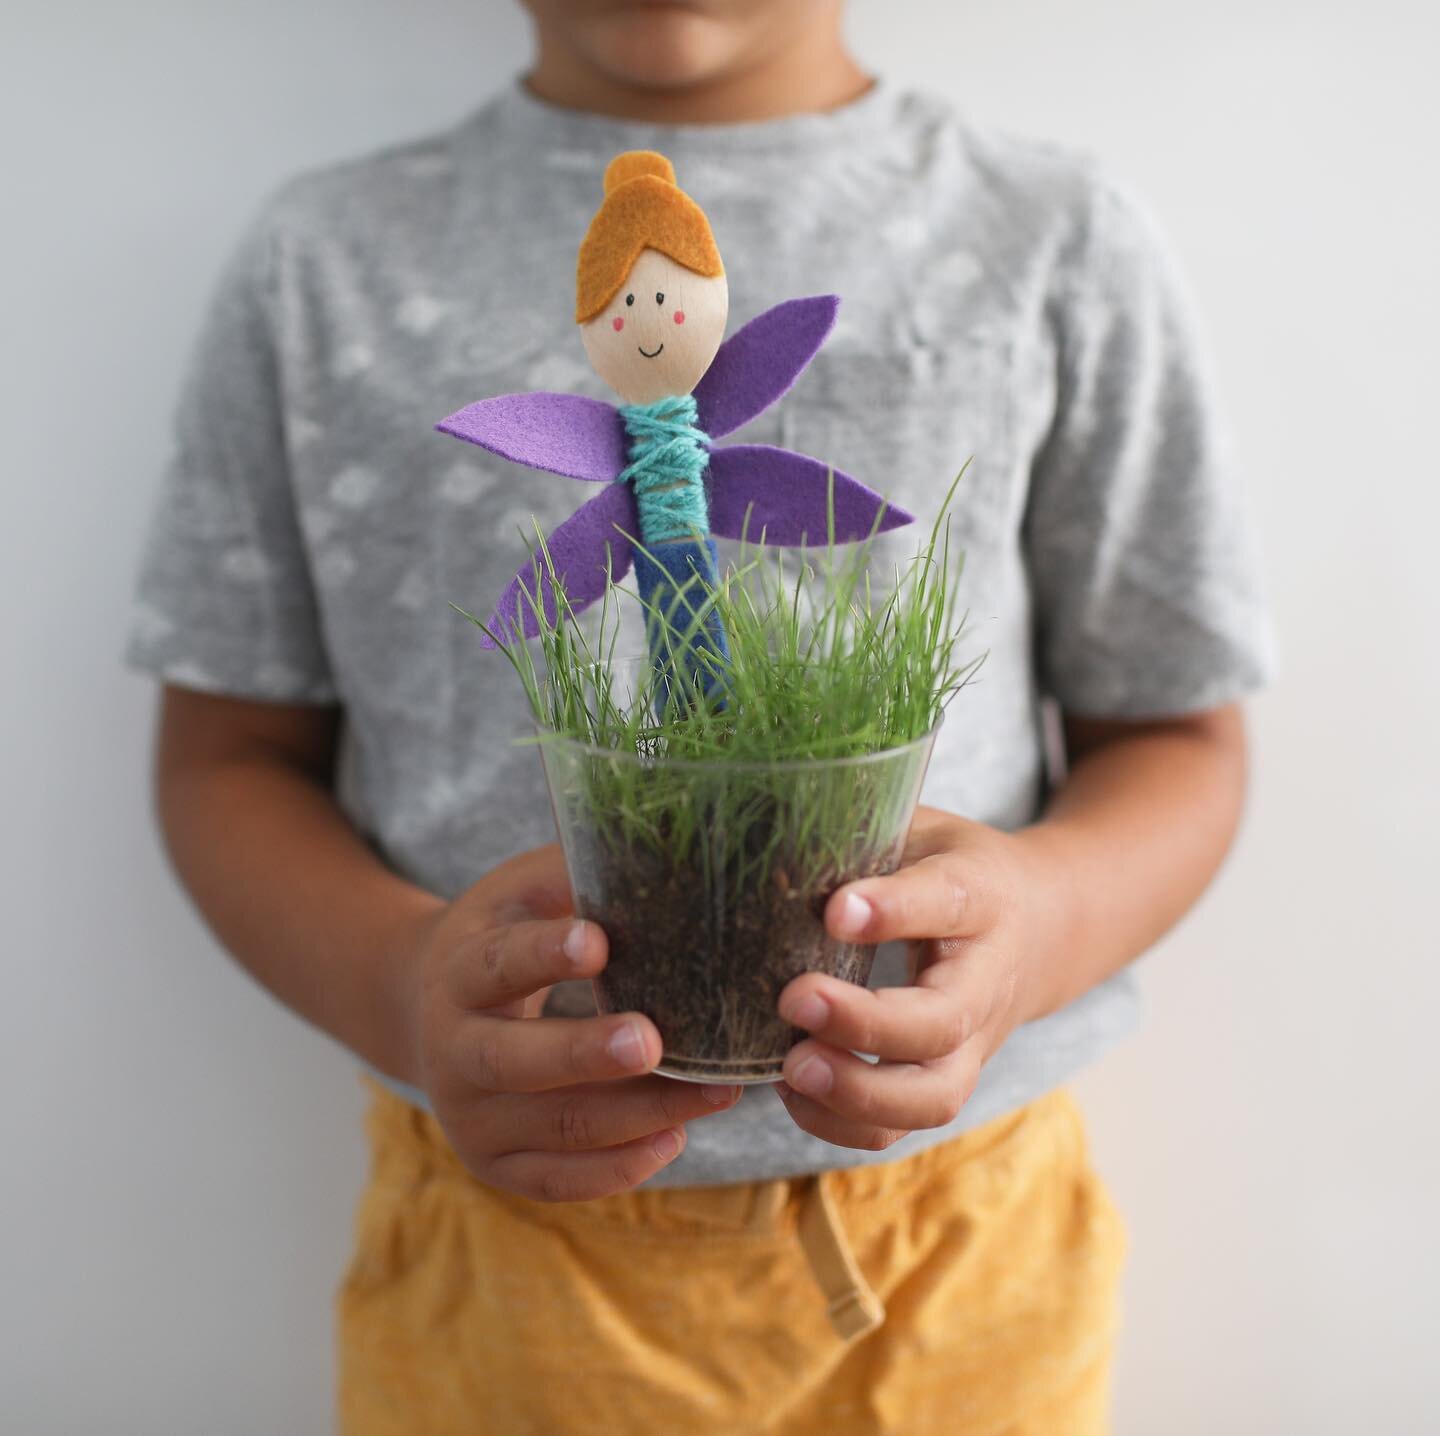 Mary, Mary quite contrary, How does your garden grow? This week we also included the materials for kids to grow their own grass and a rendition of this sweet garden fairy. The beauty of #thedollyproject is that each week, the exact materials are incl